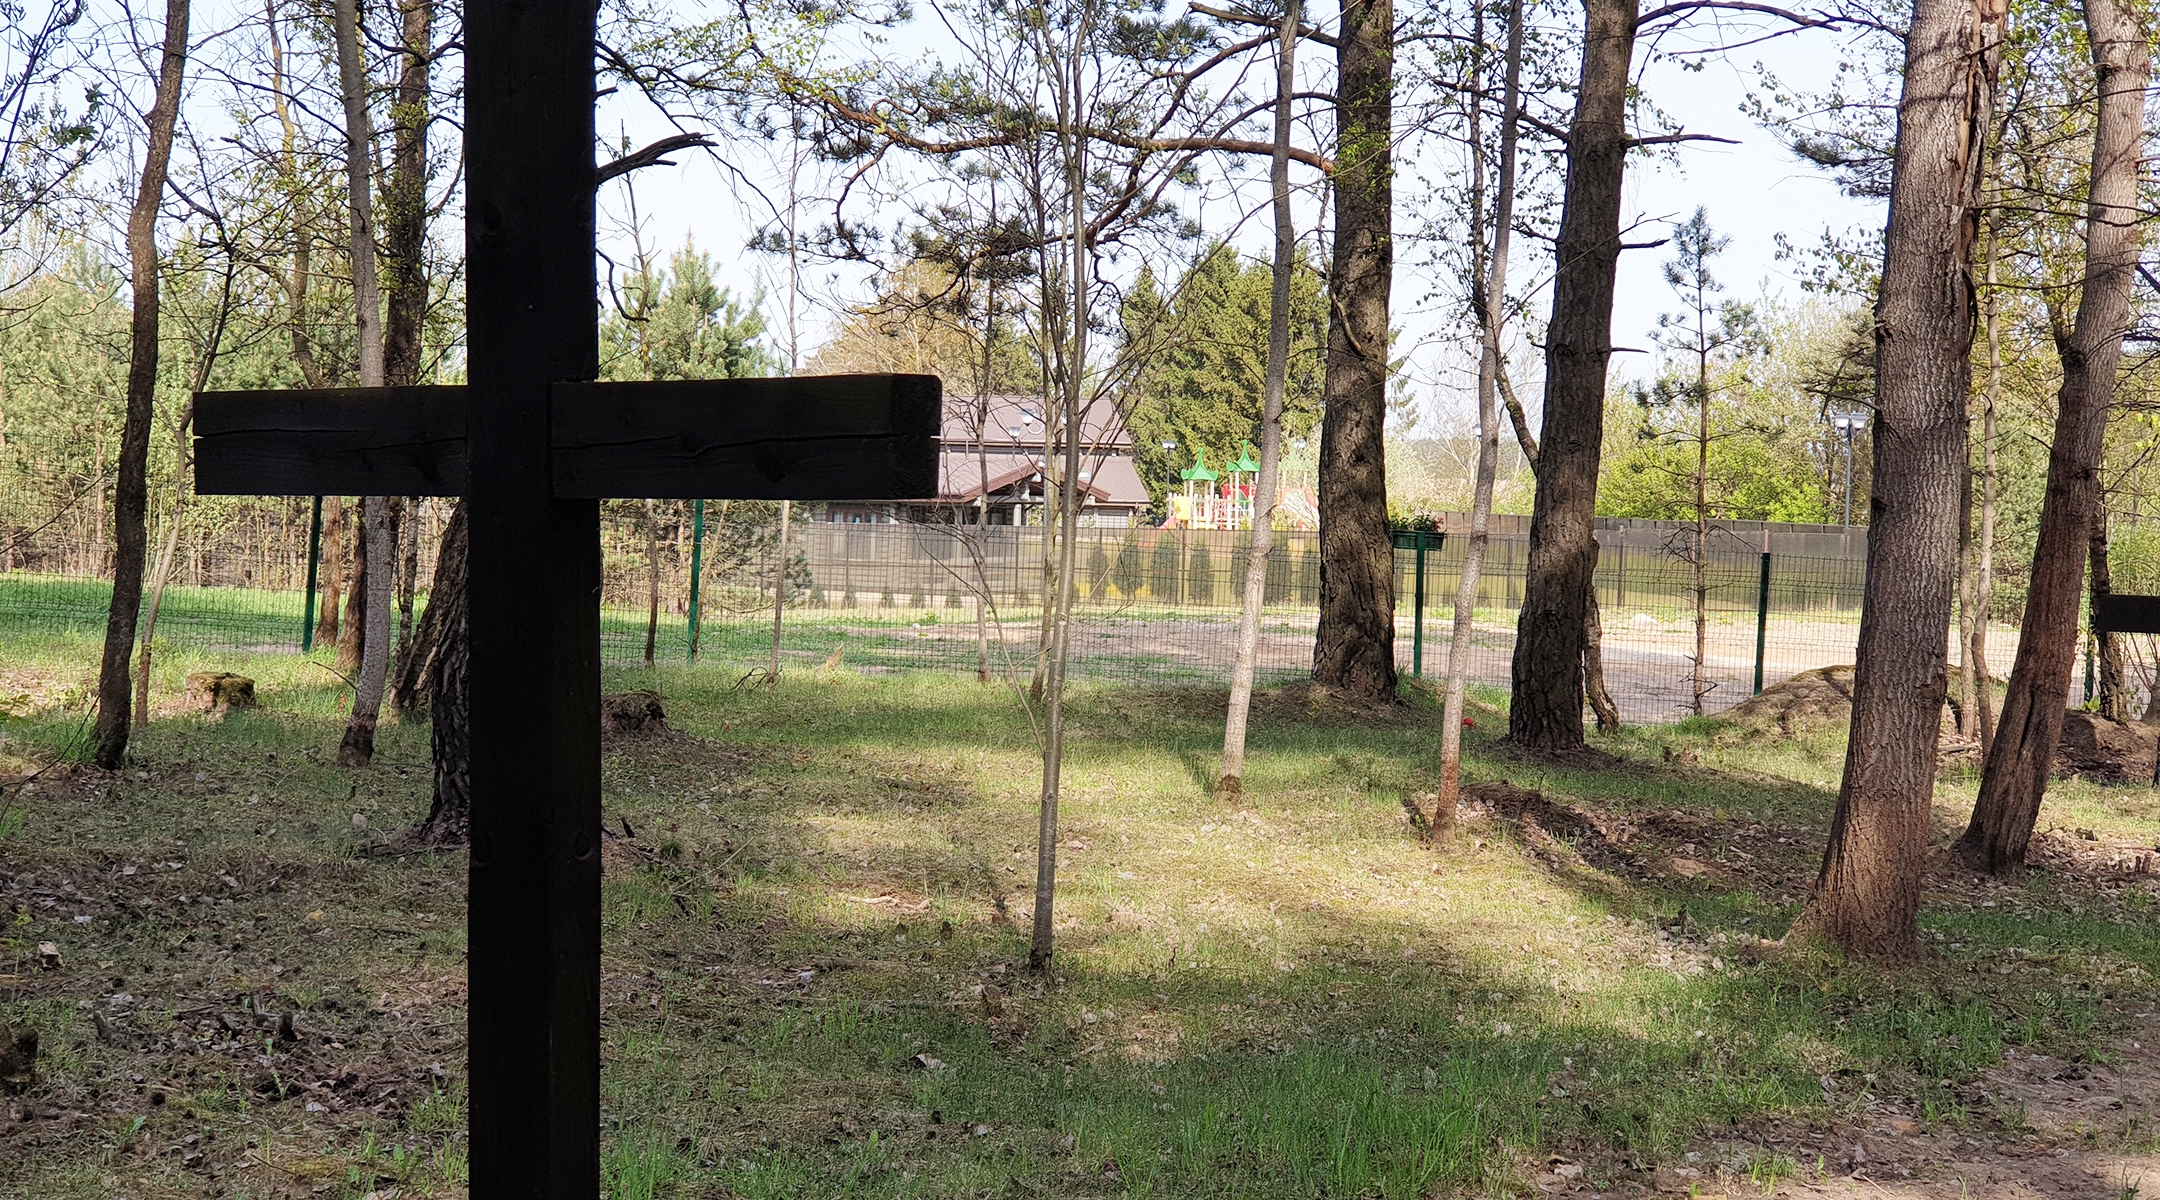 At the Kuropaty execution site, the children's amusement park of a new restaurant built in 2018 overlooks wooden crosses for the victims of Stalinism. (Cnaan Liphshiz) 